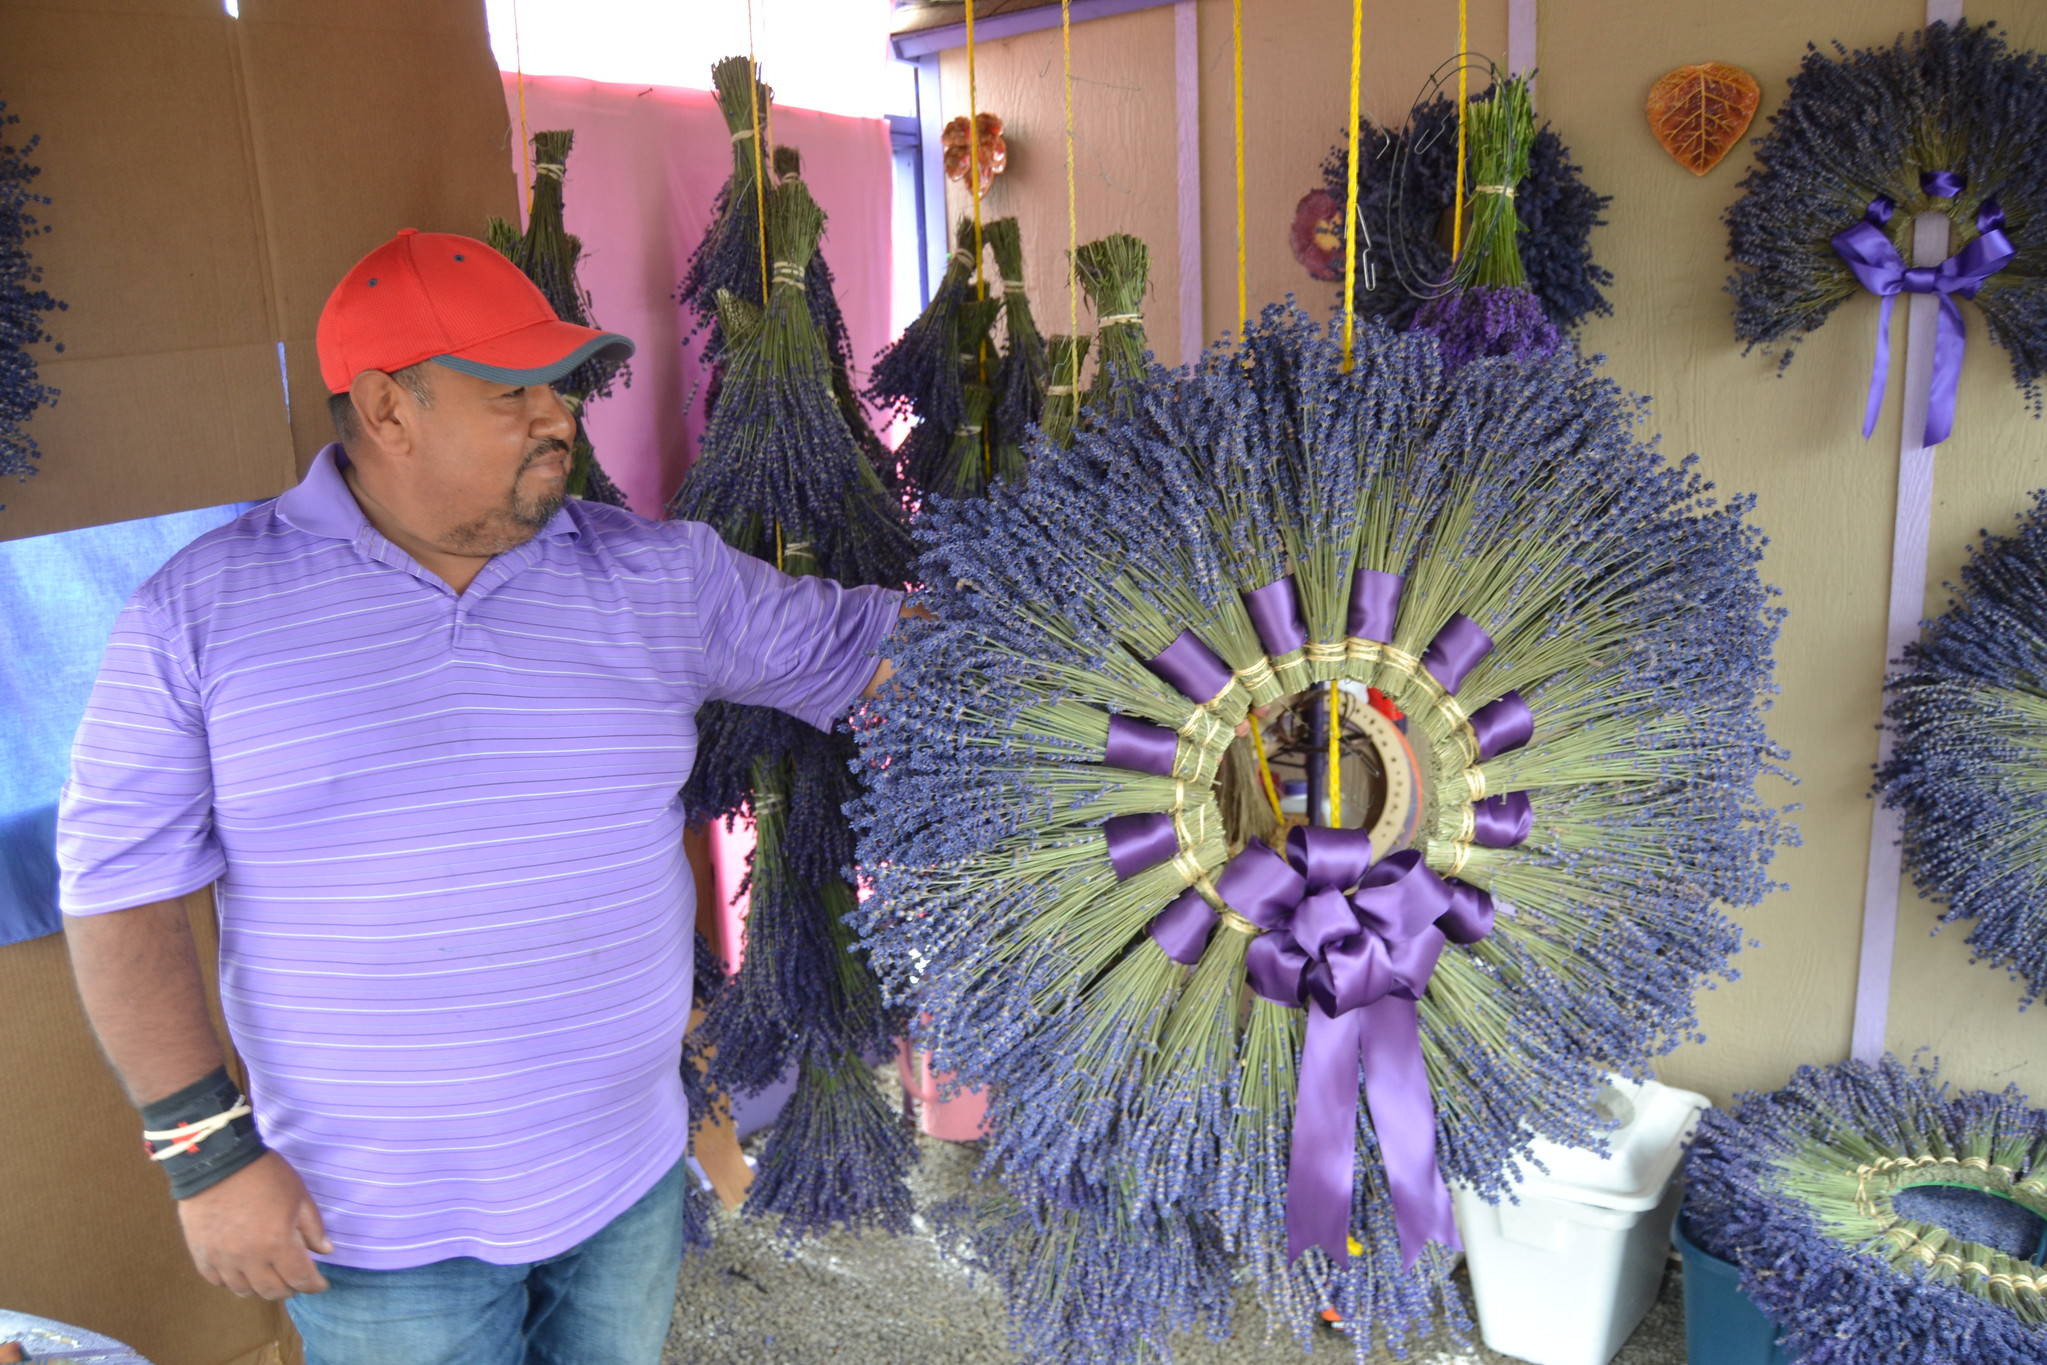 <strong>Matthew Nash</strong>/Olympic Peninsula News Group
Sergio Gonzalez stands with one of the wreaths he made for a customer from lavender in his field at Meli’s Lavender Farm. He hopes visitors will find his farm off Old Olympic Highway this summer as COVID-19 greatly impacted his sales in 2020.